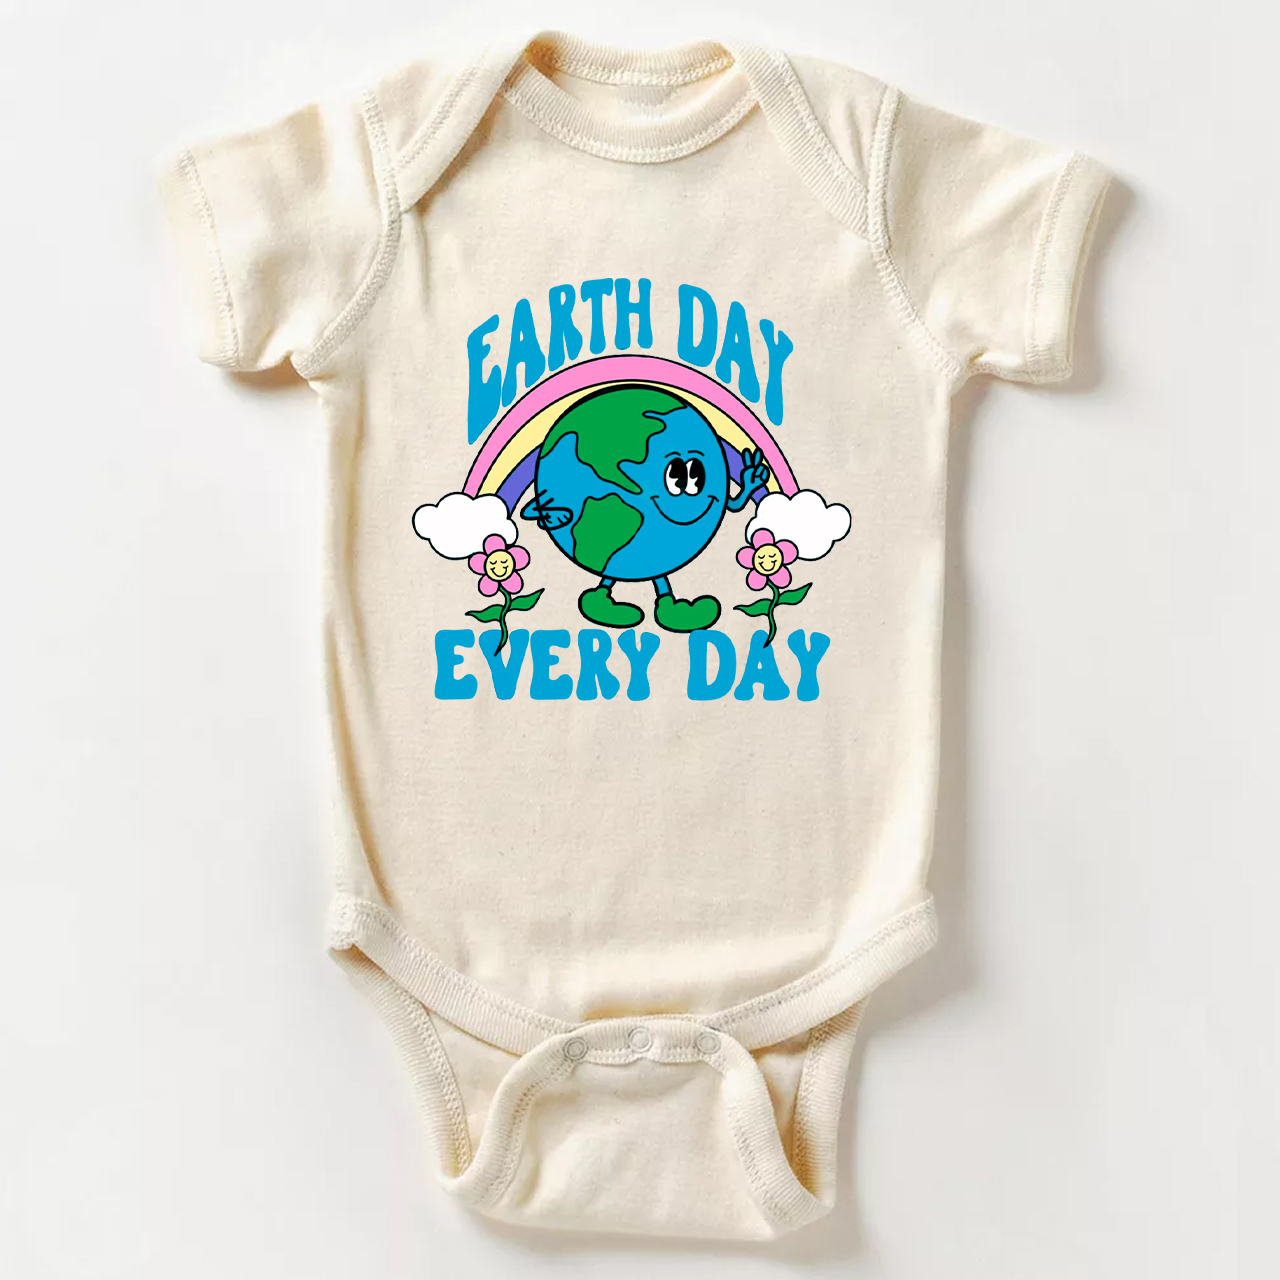 Retro Design Earth Day Every Day Bodysuit For Baby